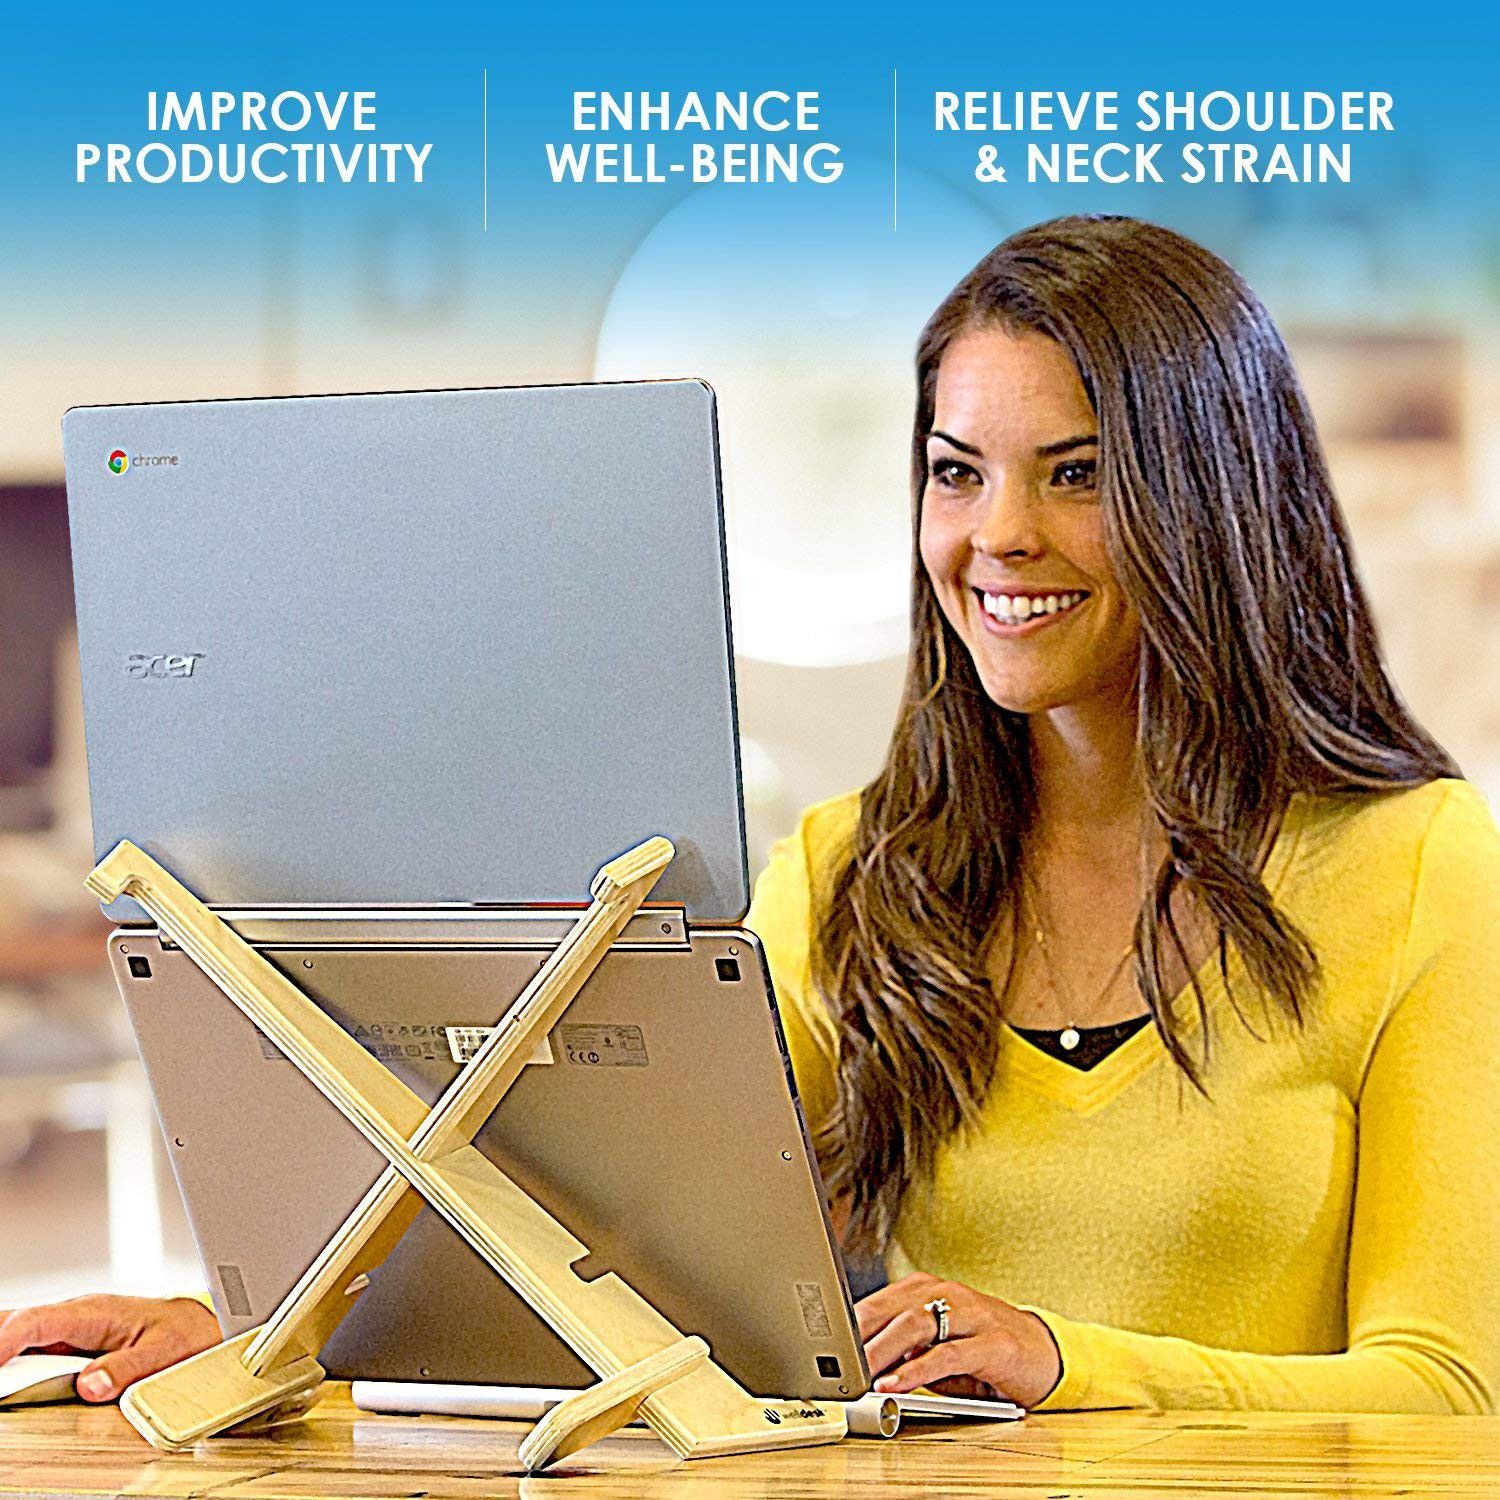 Xenstand Adjustable Laptop Stand for Desk - 3 Height Options on Table - Portable - Ventilated All Wood Design - Improve Posture- Made in USA